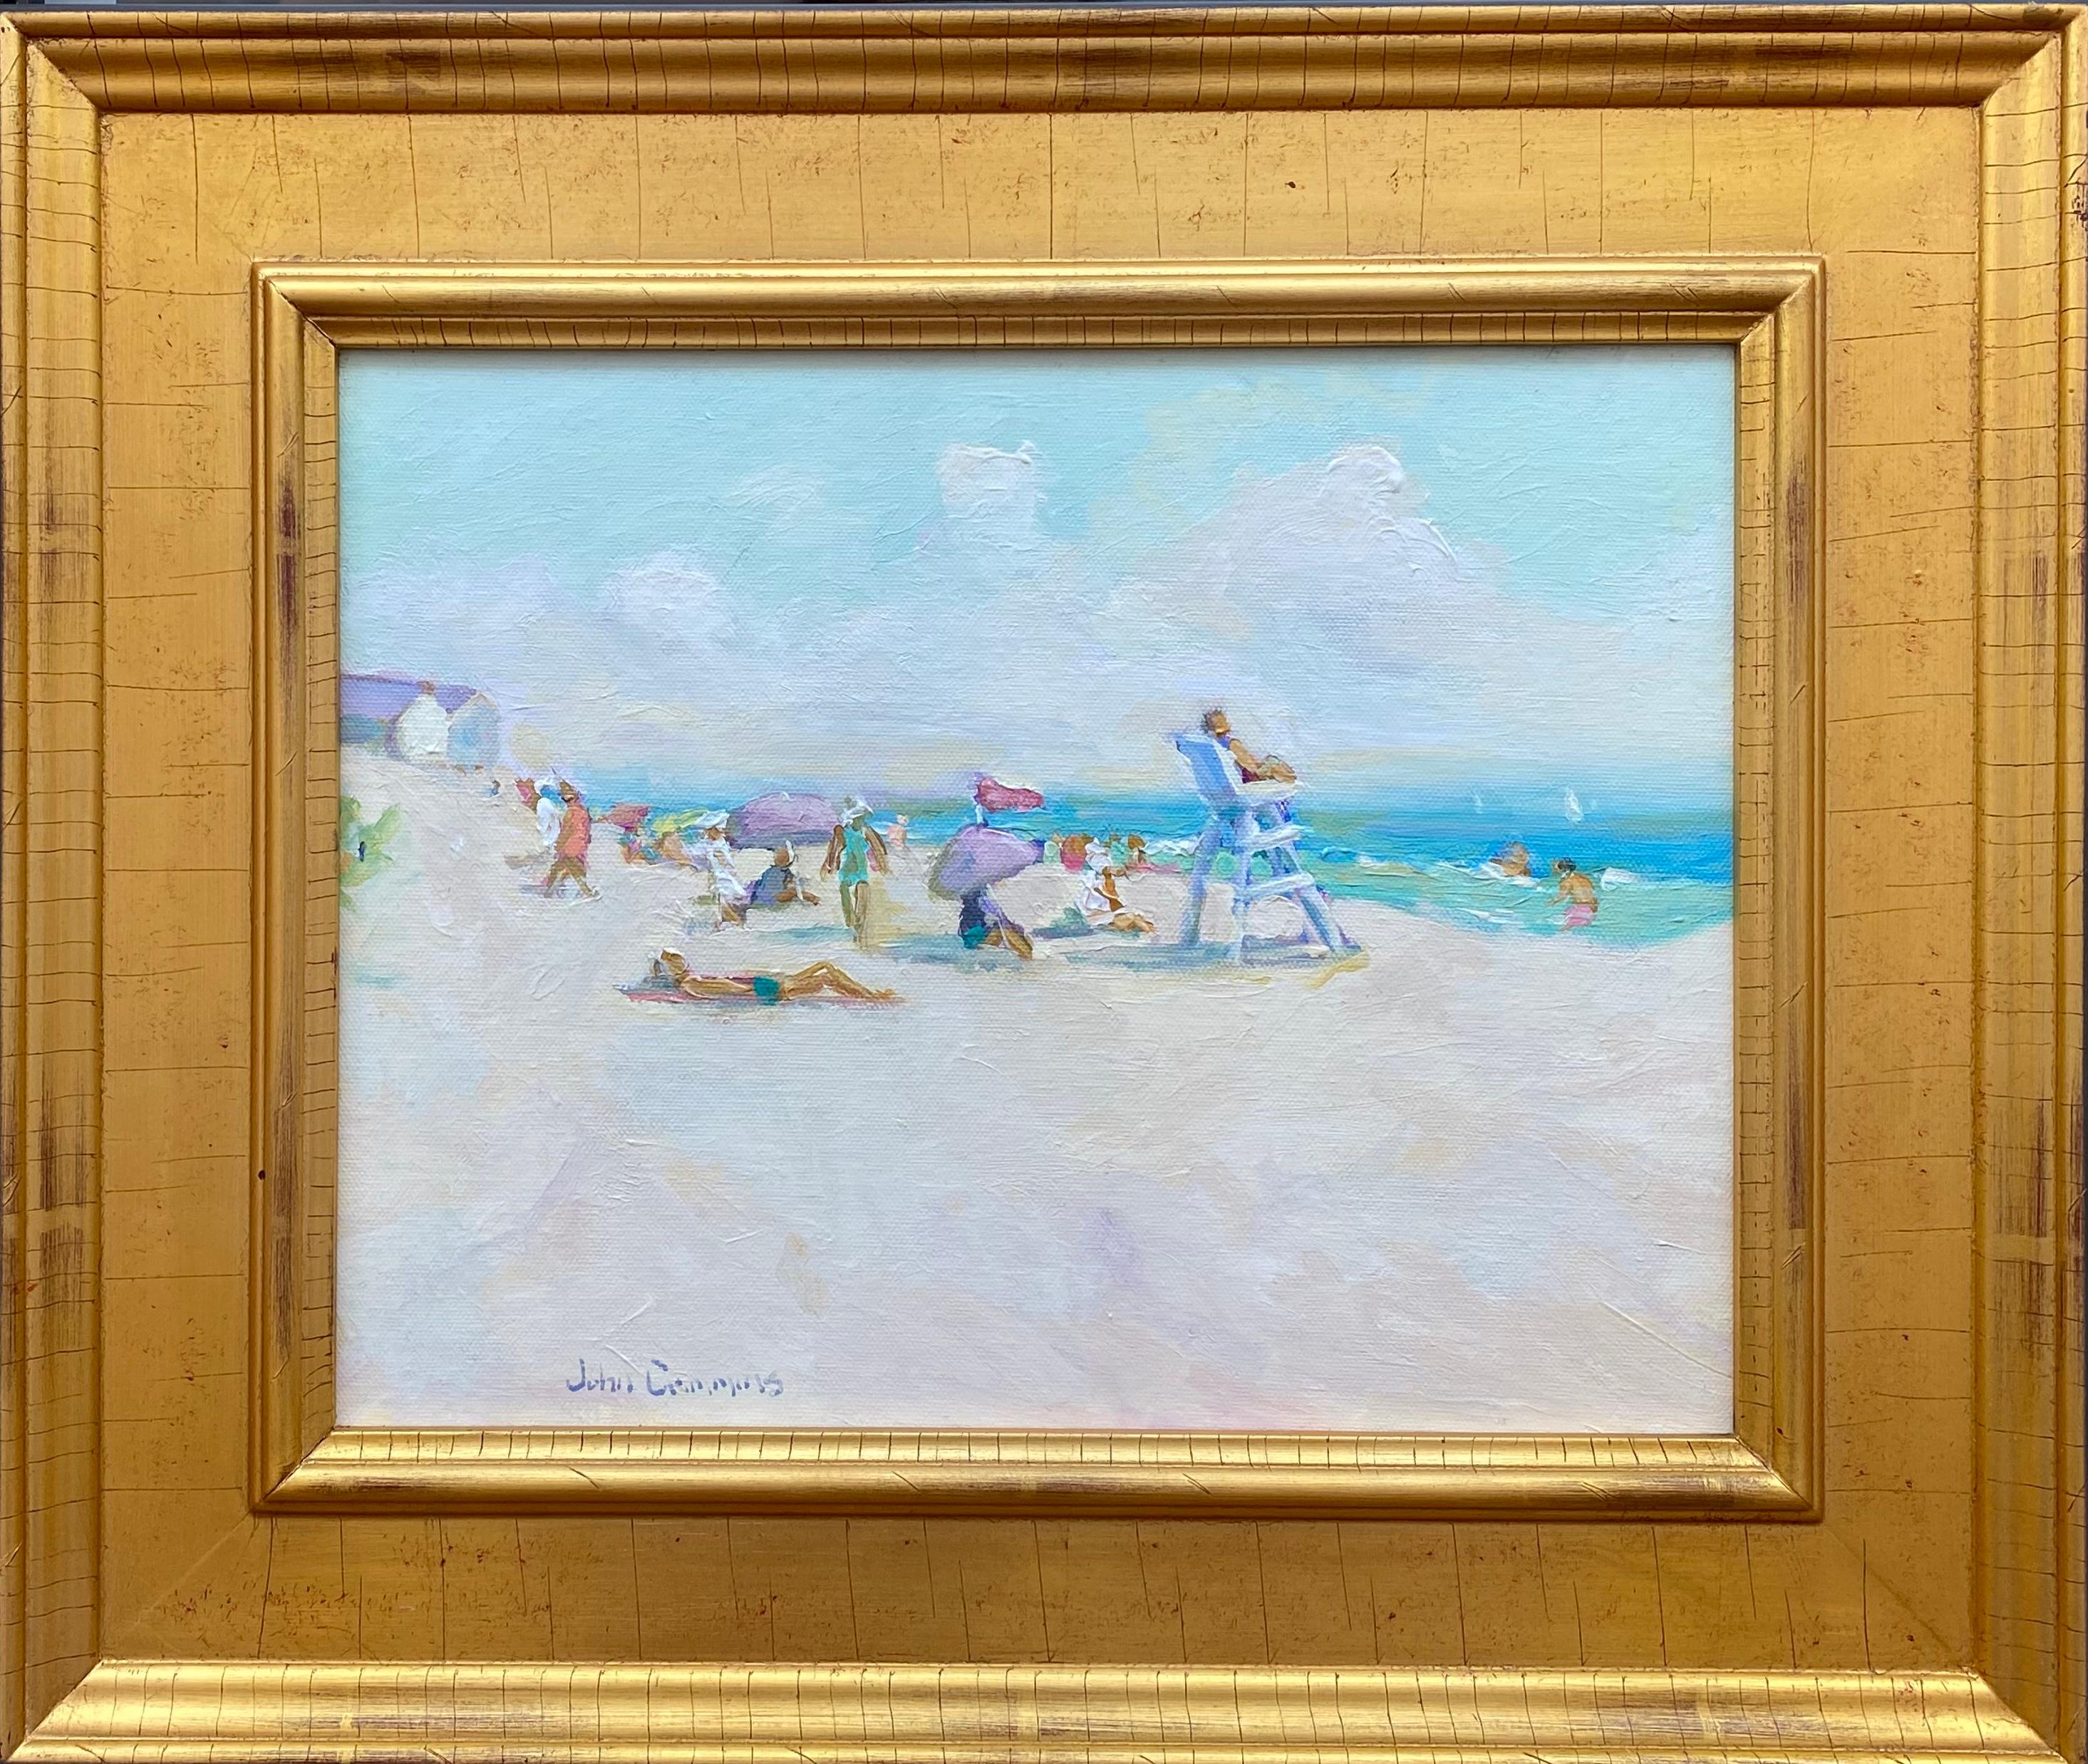 “Cooper’s Beach, Southampton” - Post-Impressionist Painting by John Crimmins